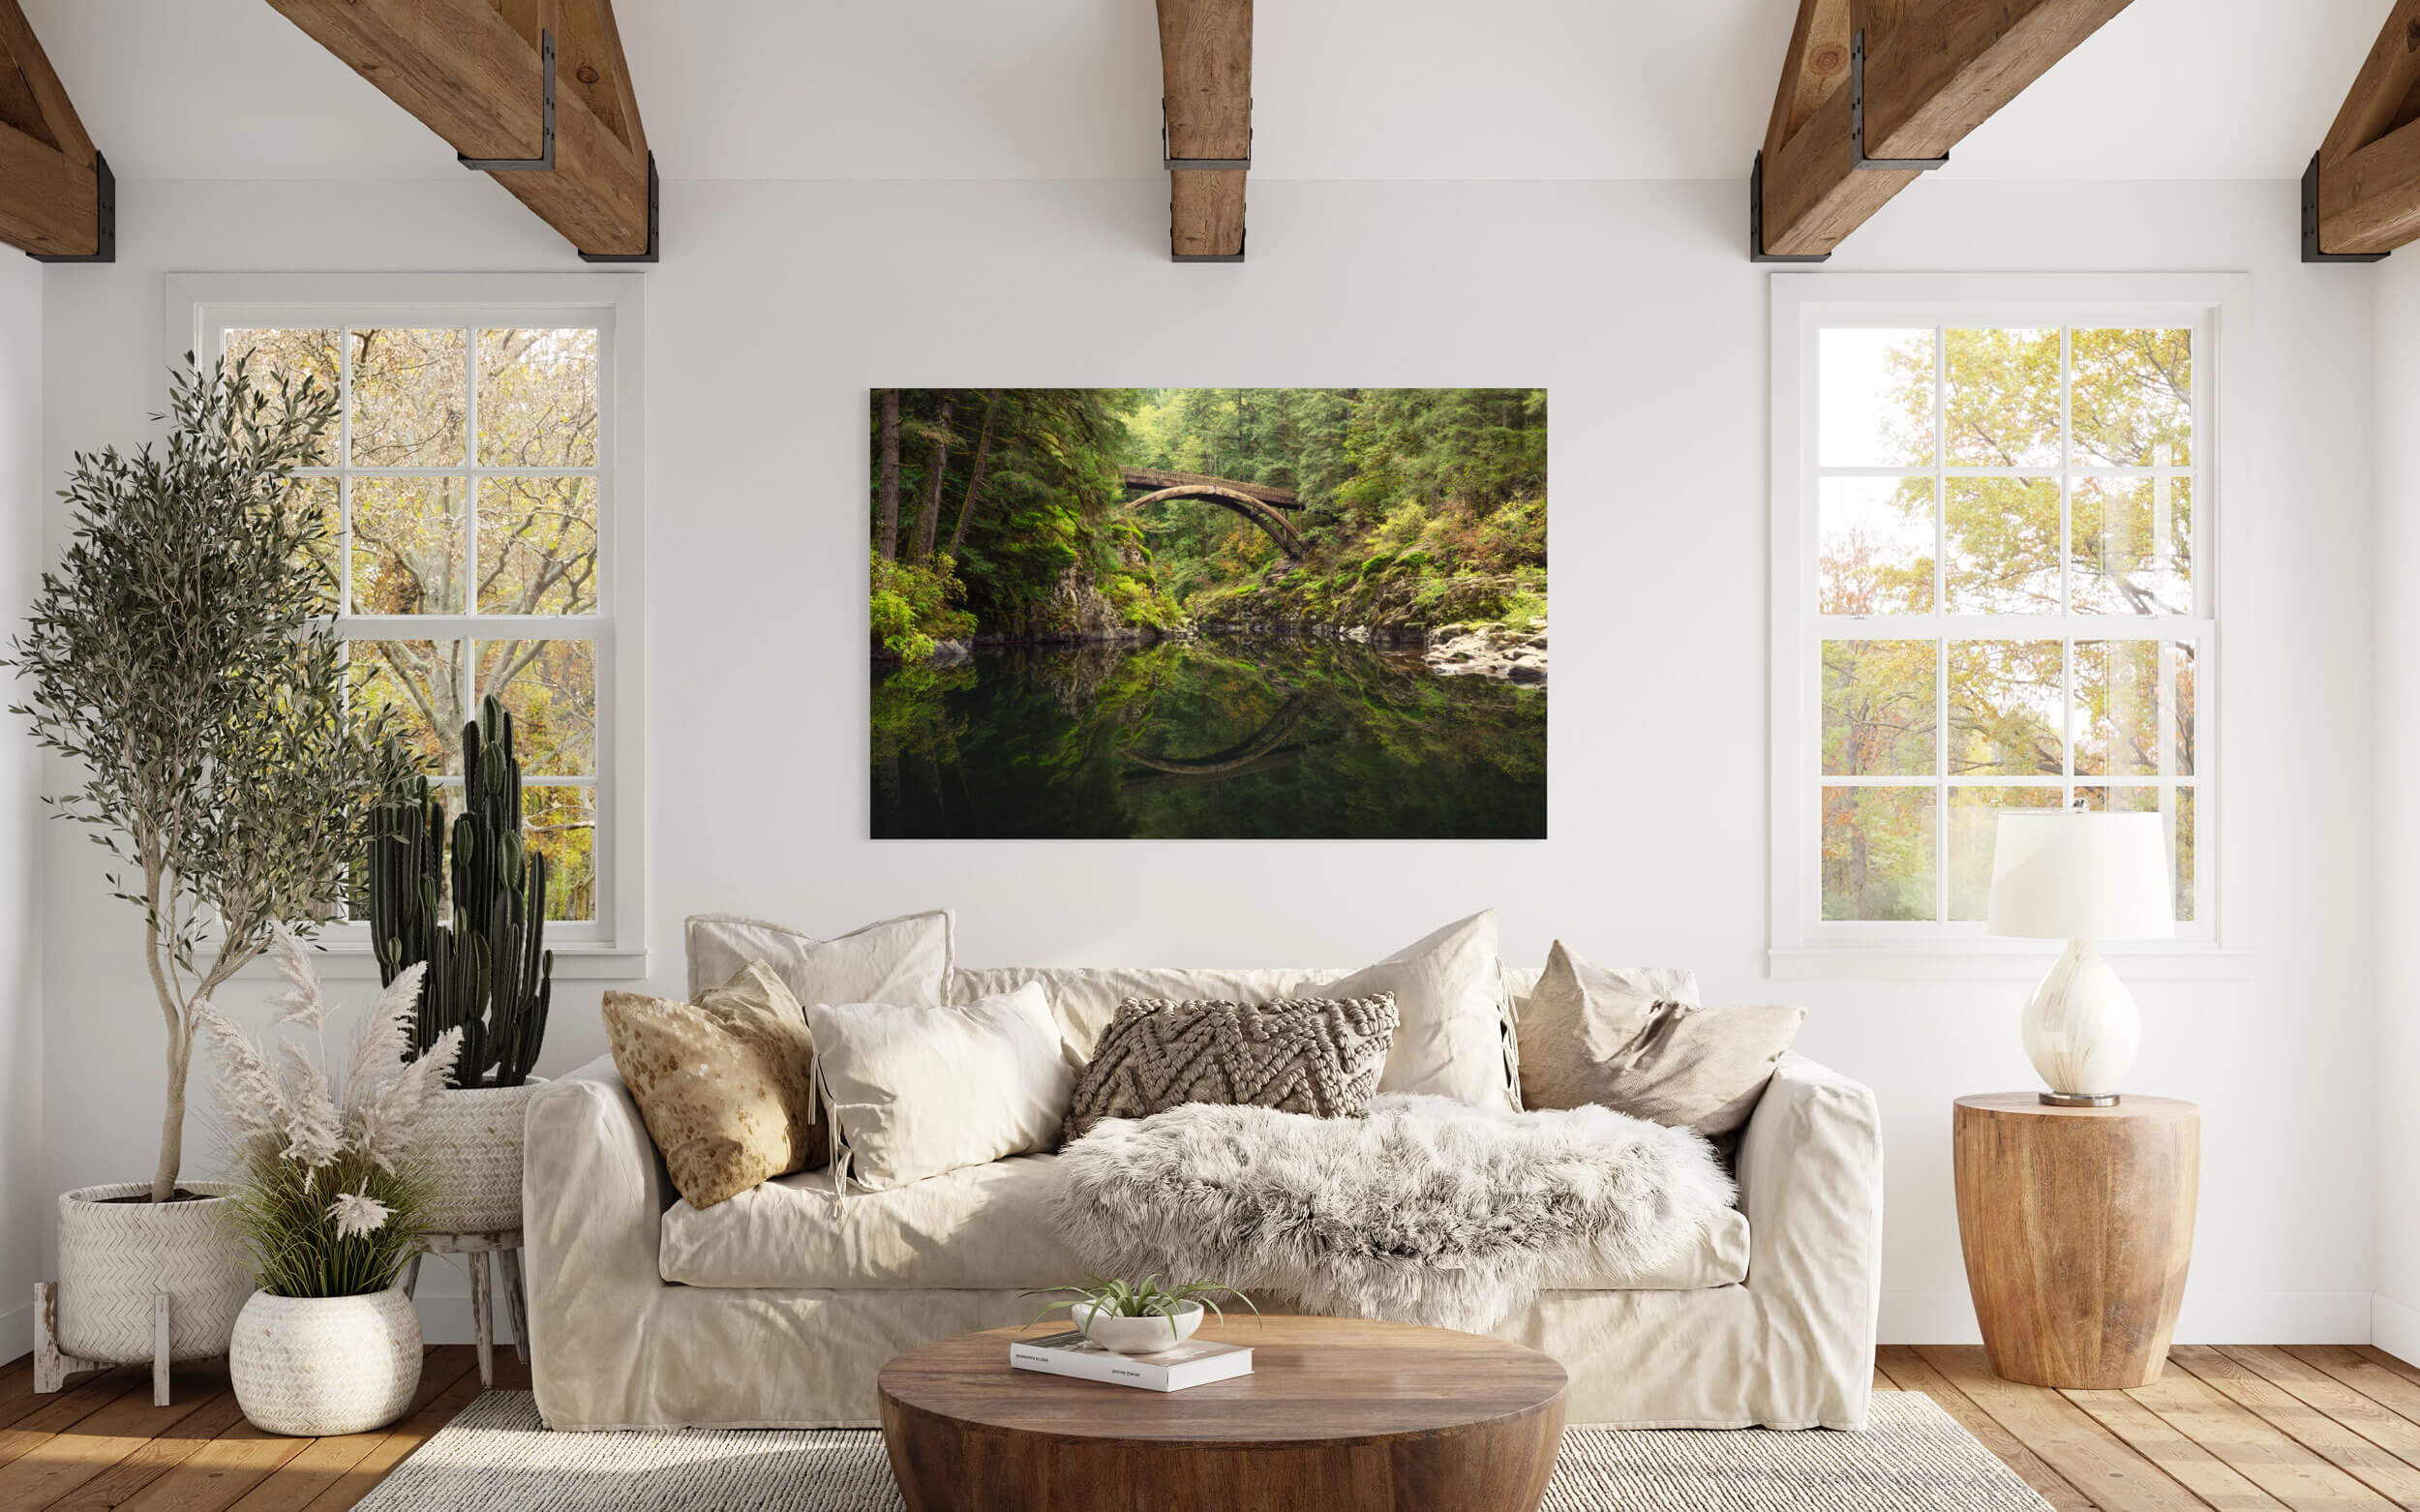 A Moulton Falls picture showing the first fall colors hangs in a living room.